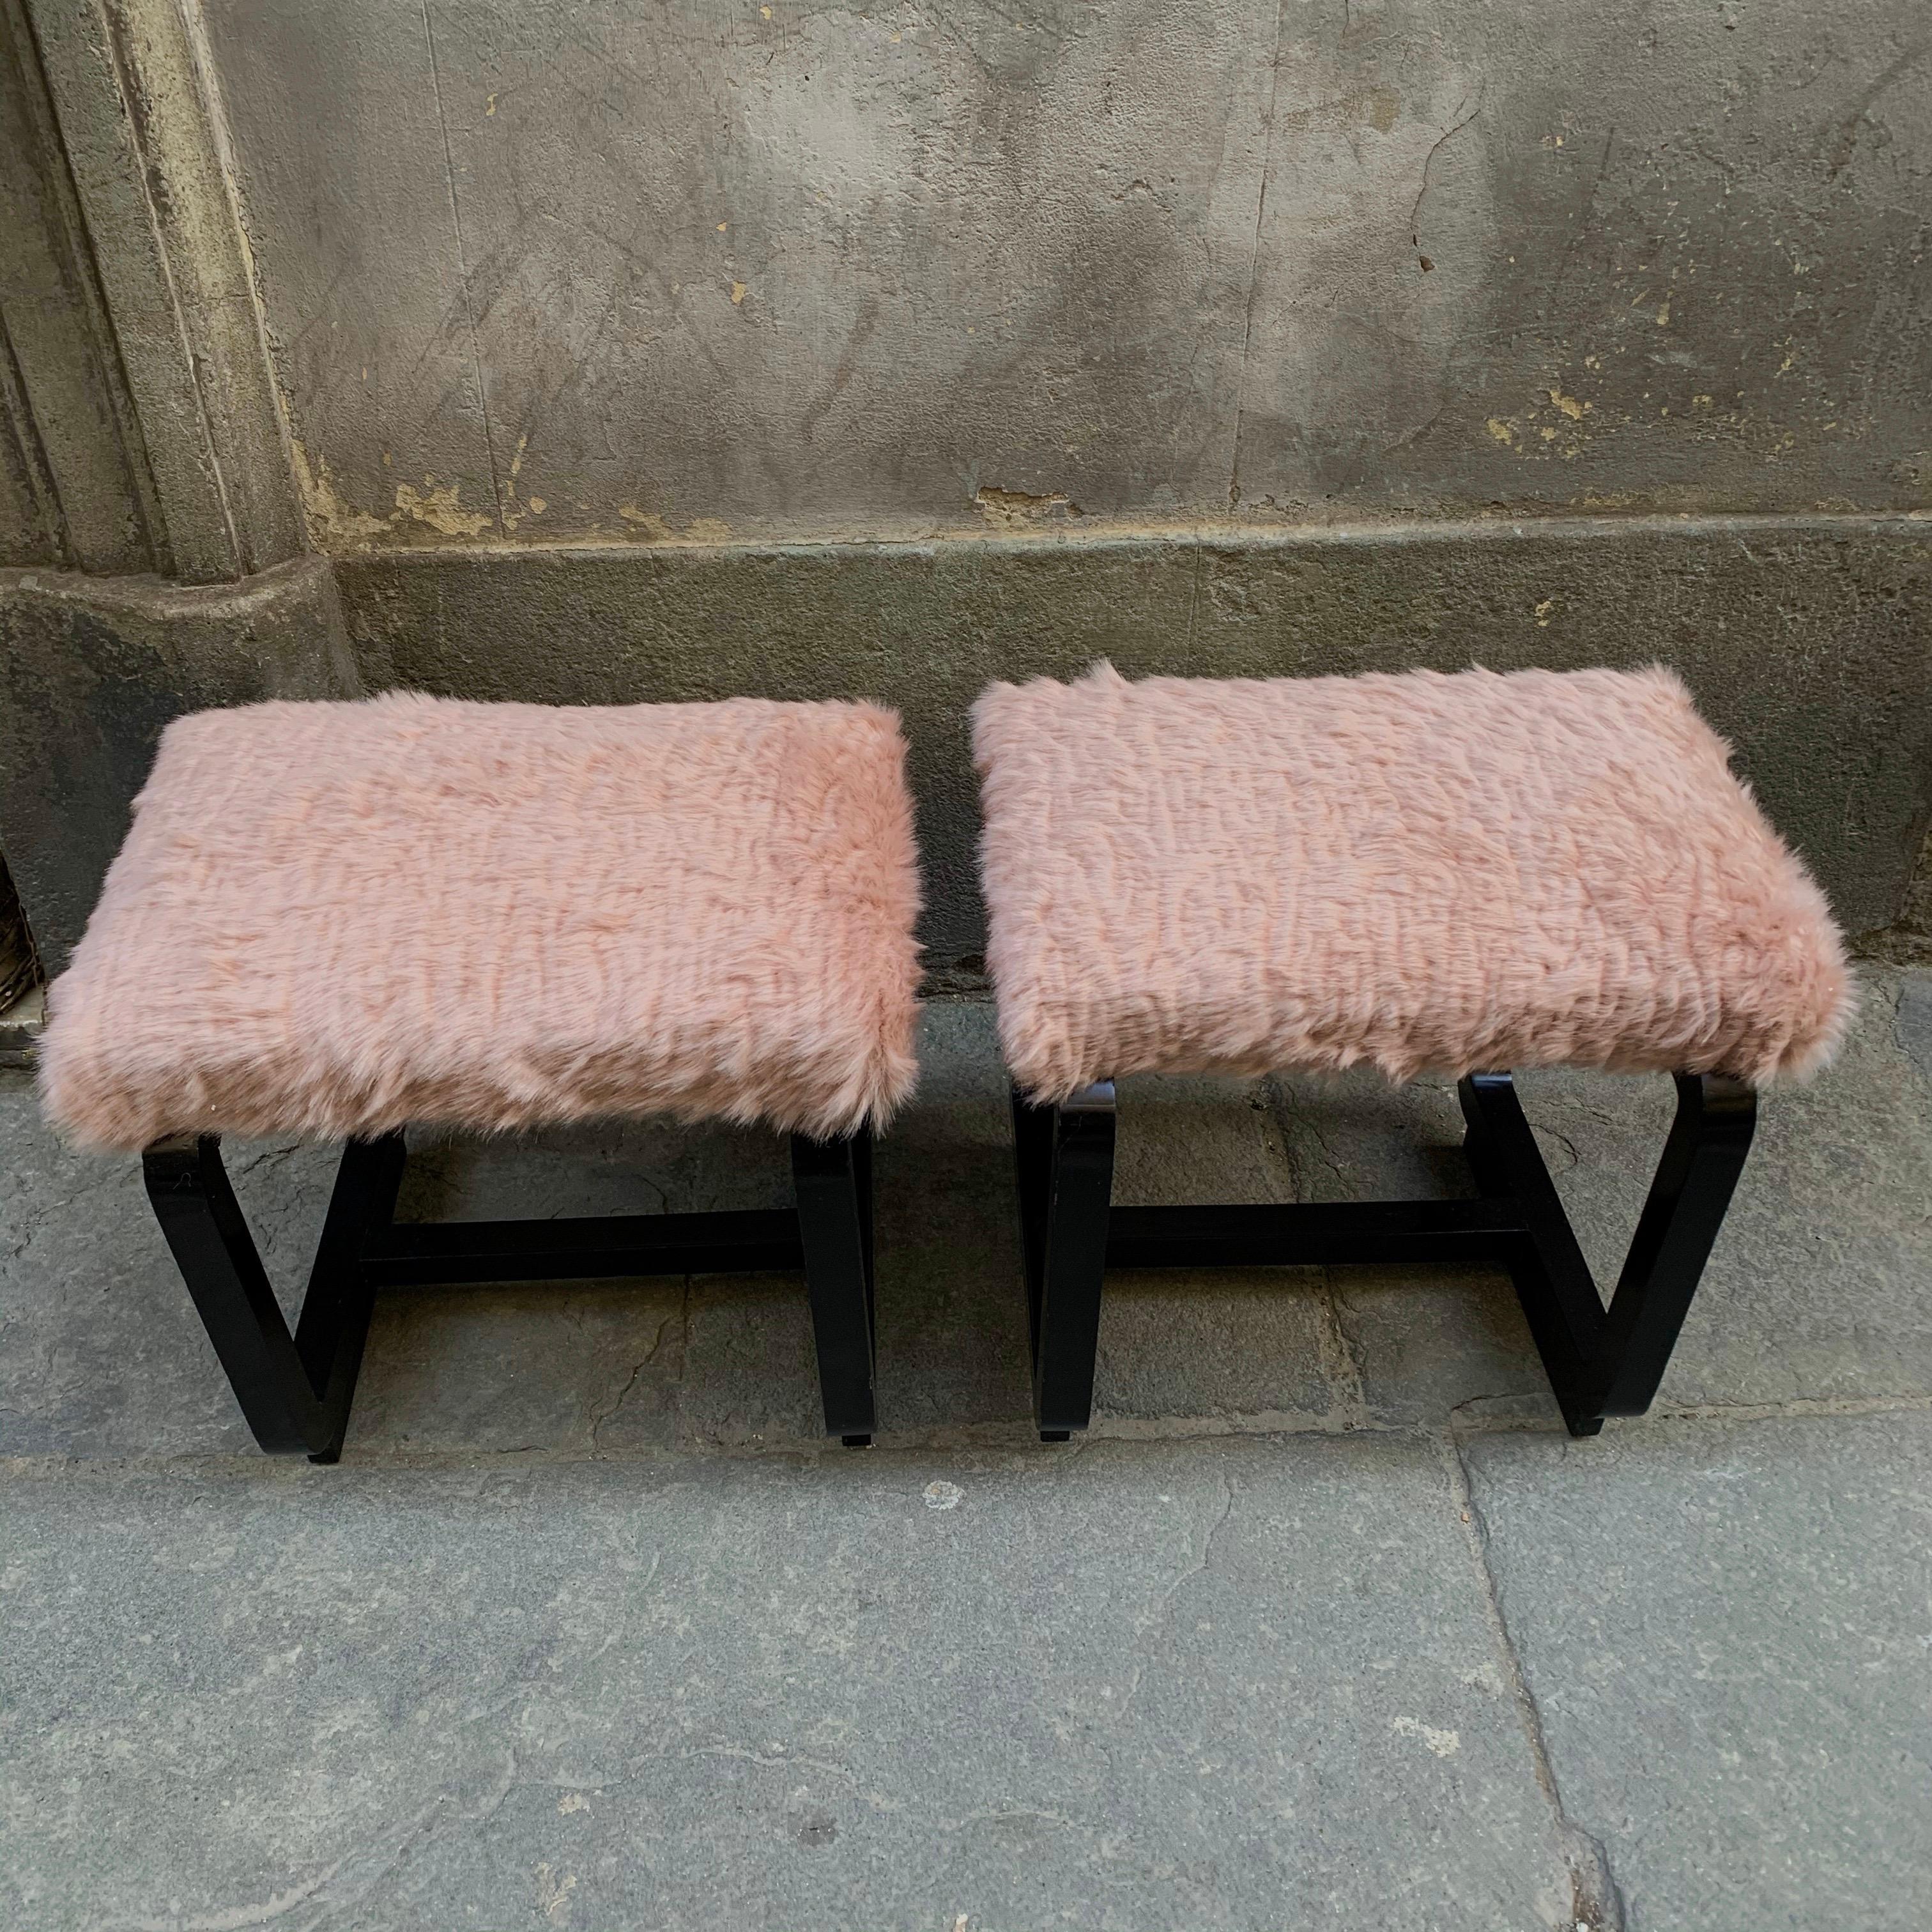 Art Deco Pair of Deco Benches in Black Lacquered Wood and Pale Pink Eco Fur Seats, 1930